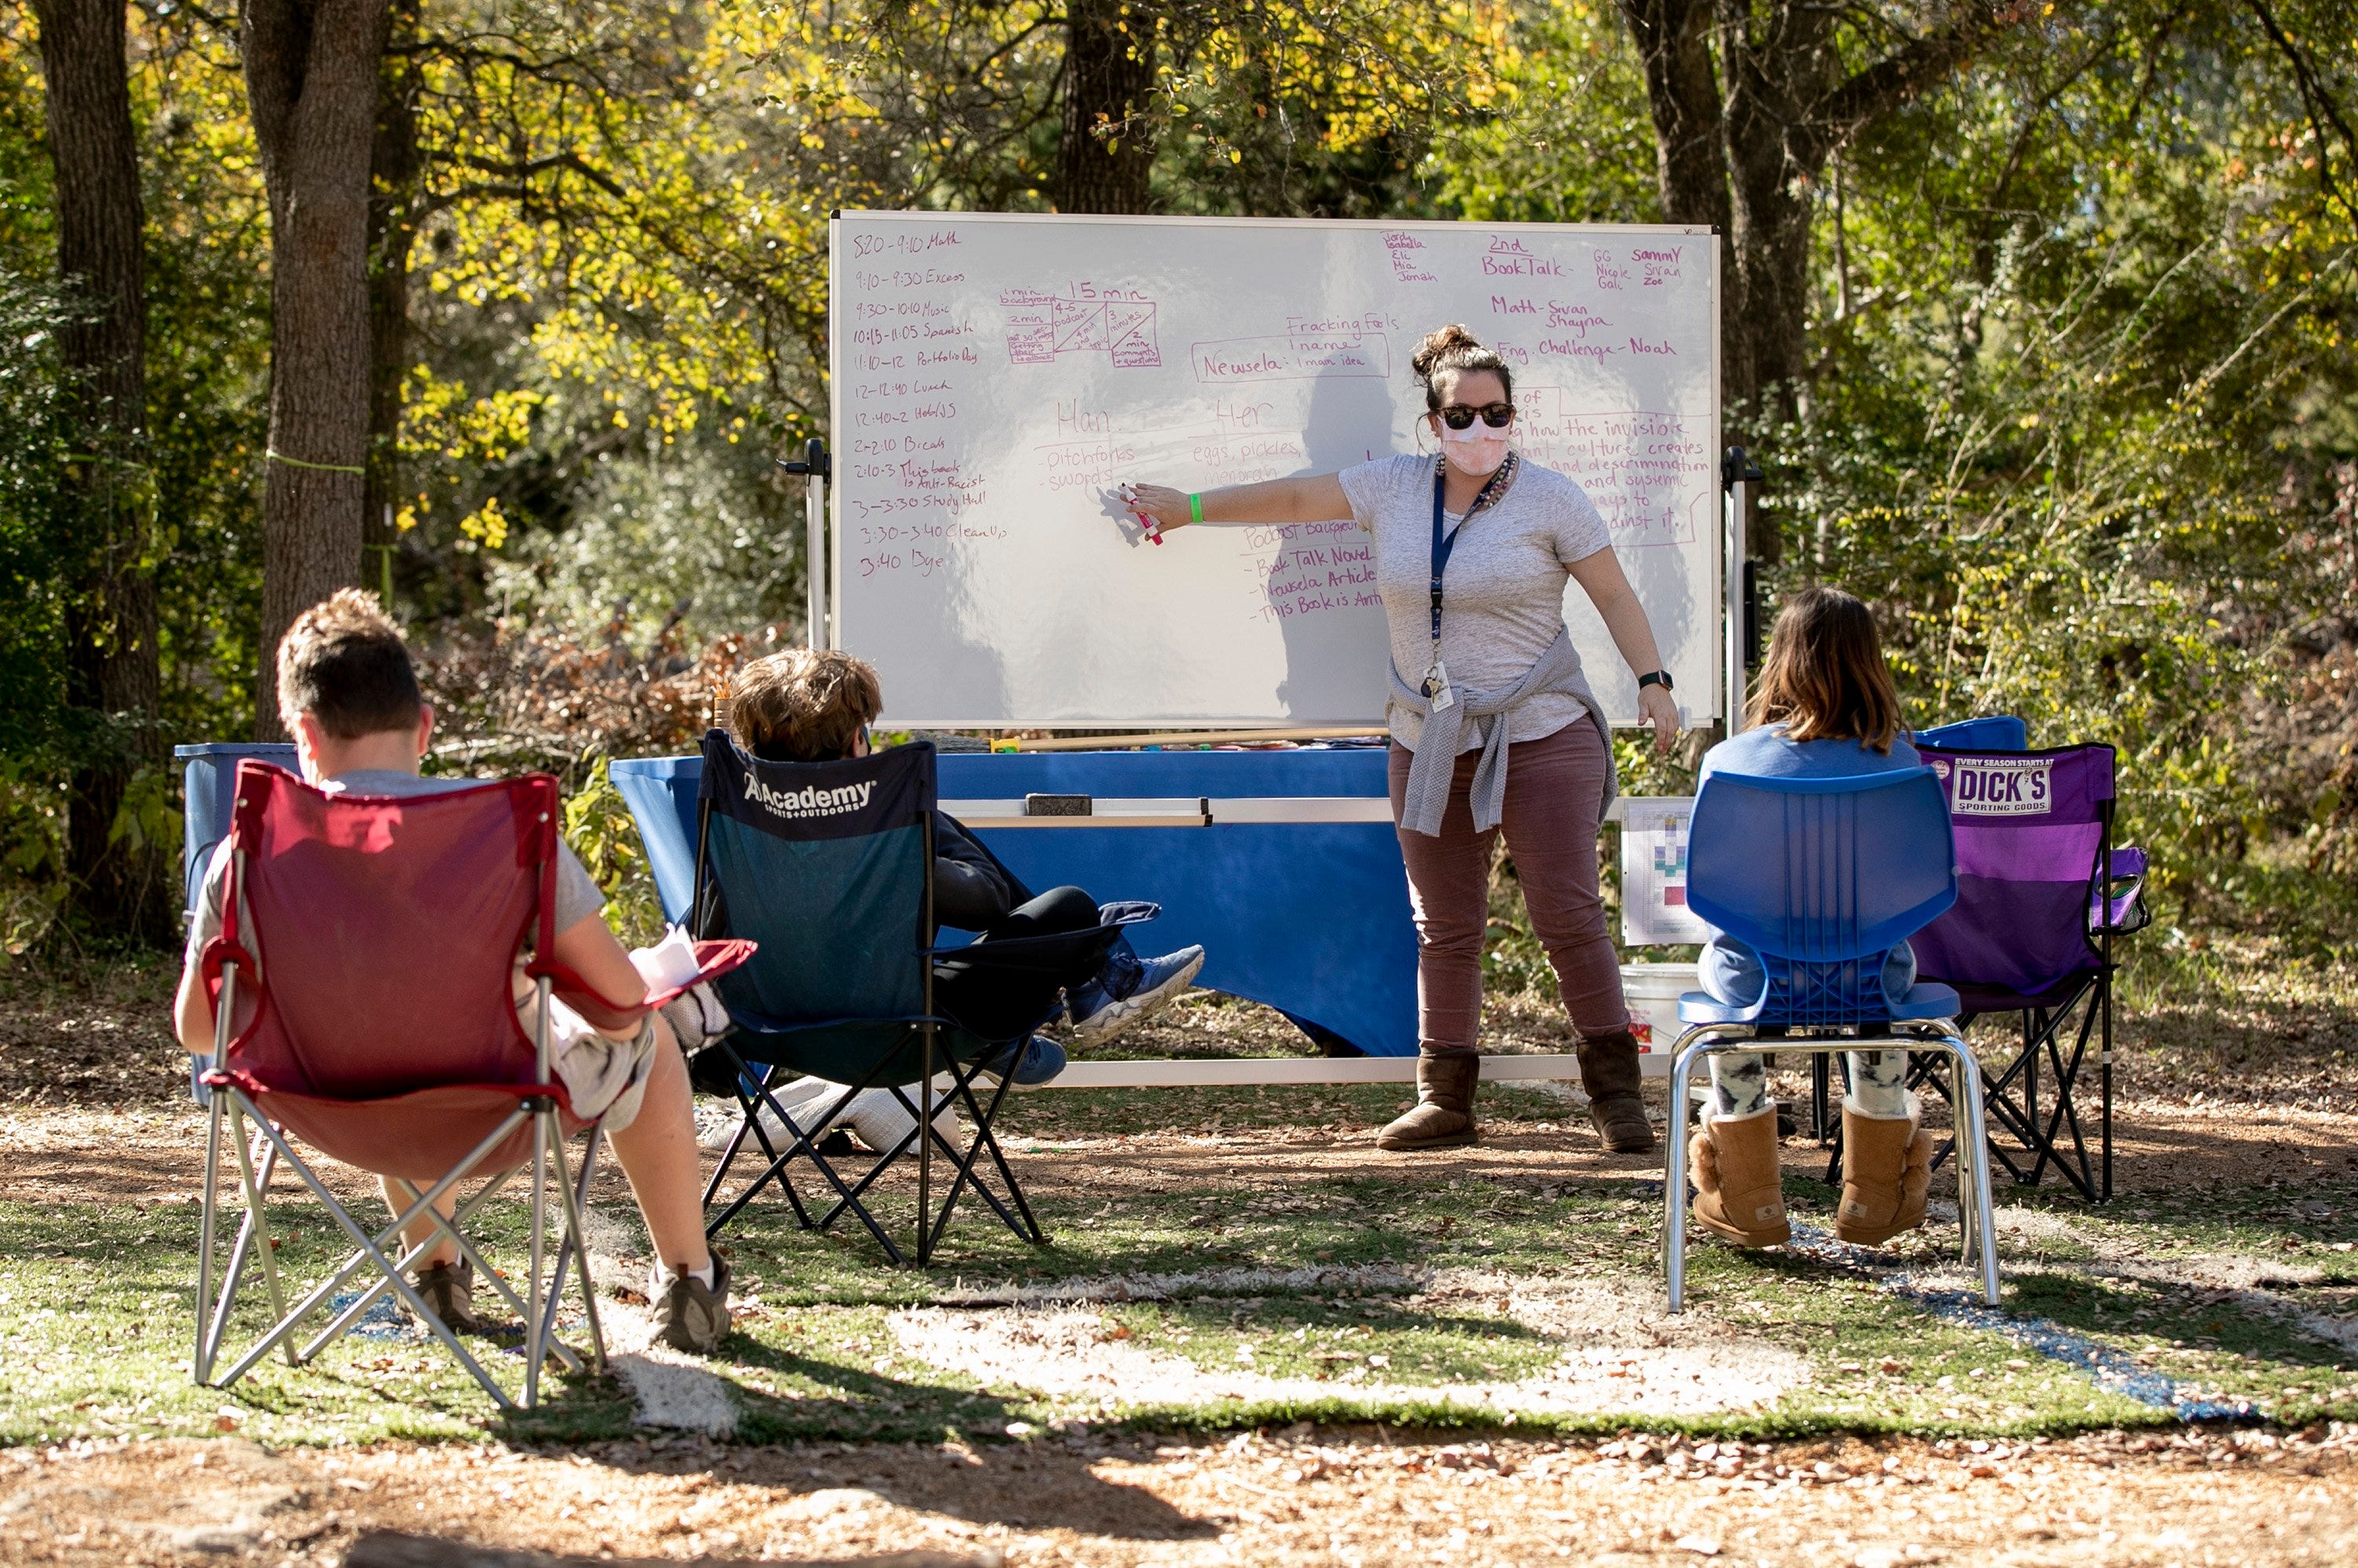 Jewish Studies teacher Heather Kantrowitz teaches fifth-graders at an outdoor class at the Austin Jewish Academy on Tuesday December 8, 2020. 